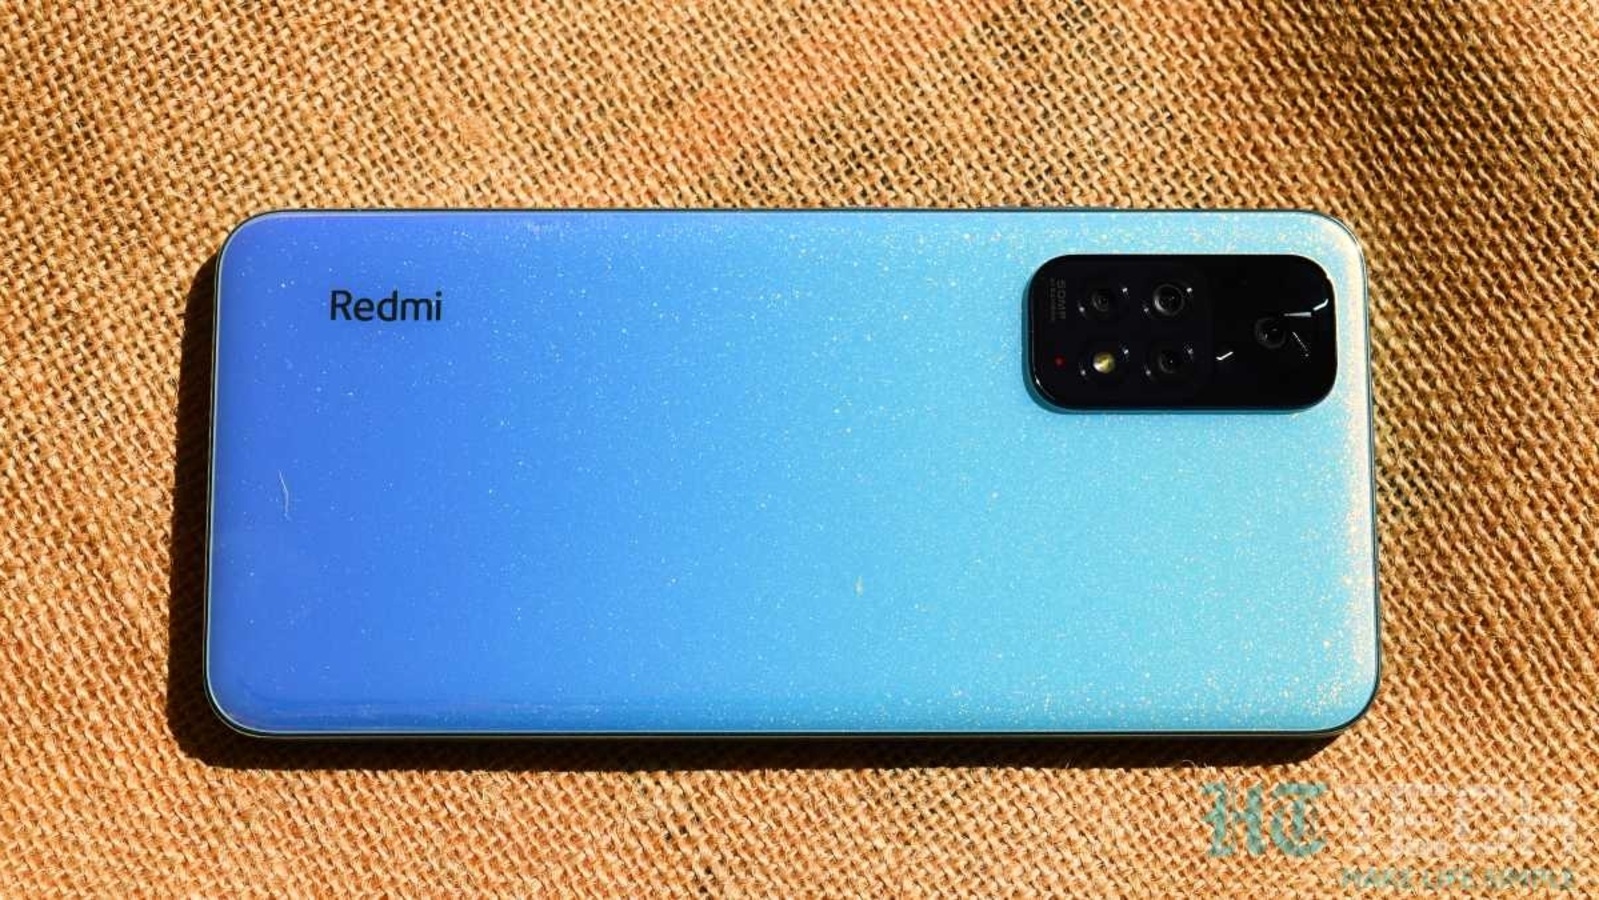 Xiaomi Redmi Note 11T Pro and Pro+ unveiled in China, Note 11 SE tags along  -  news